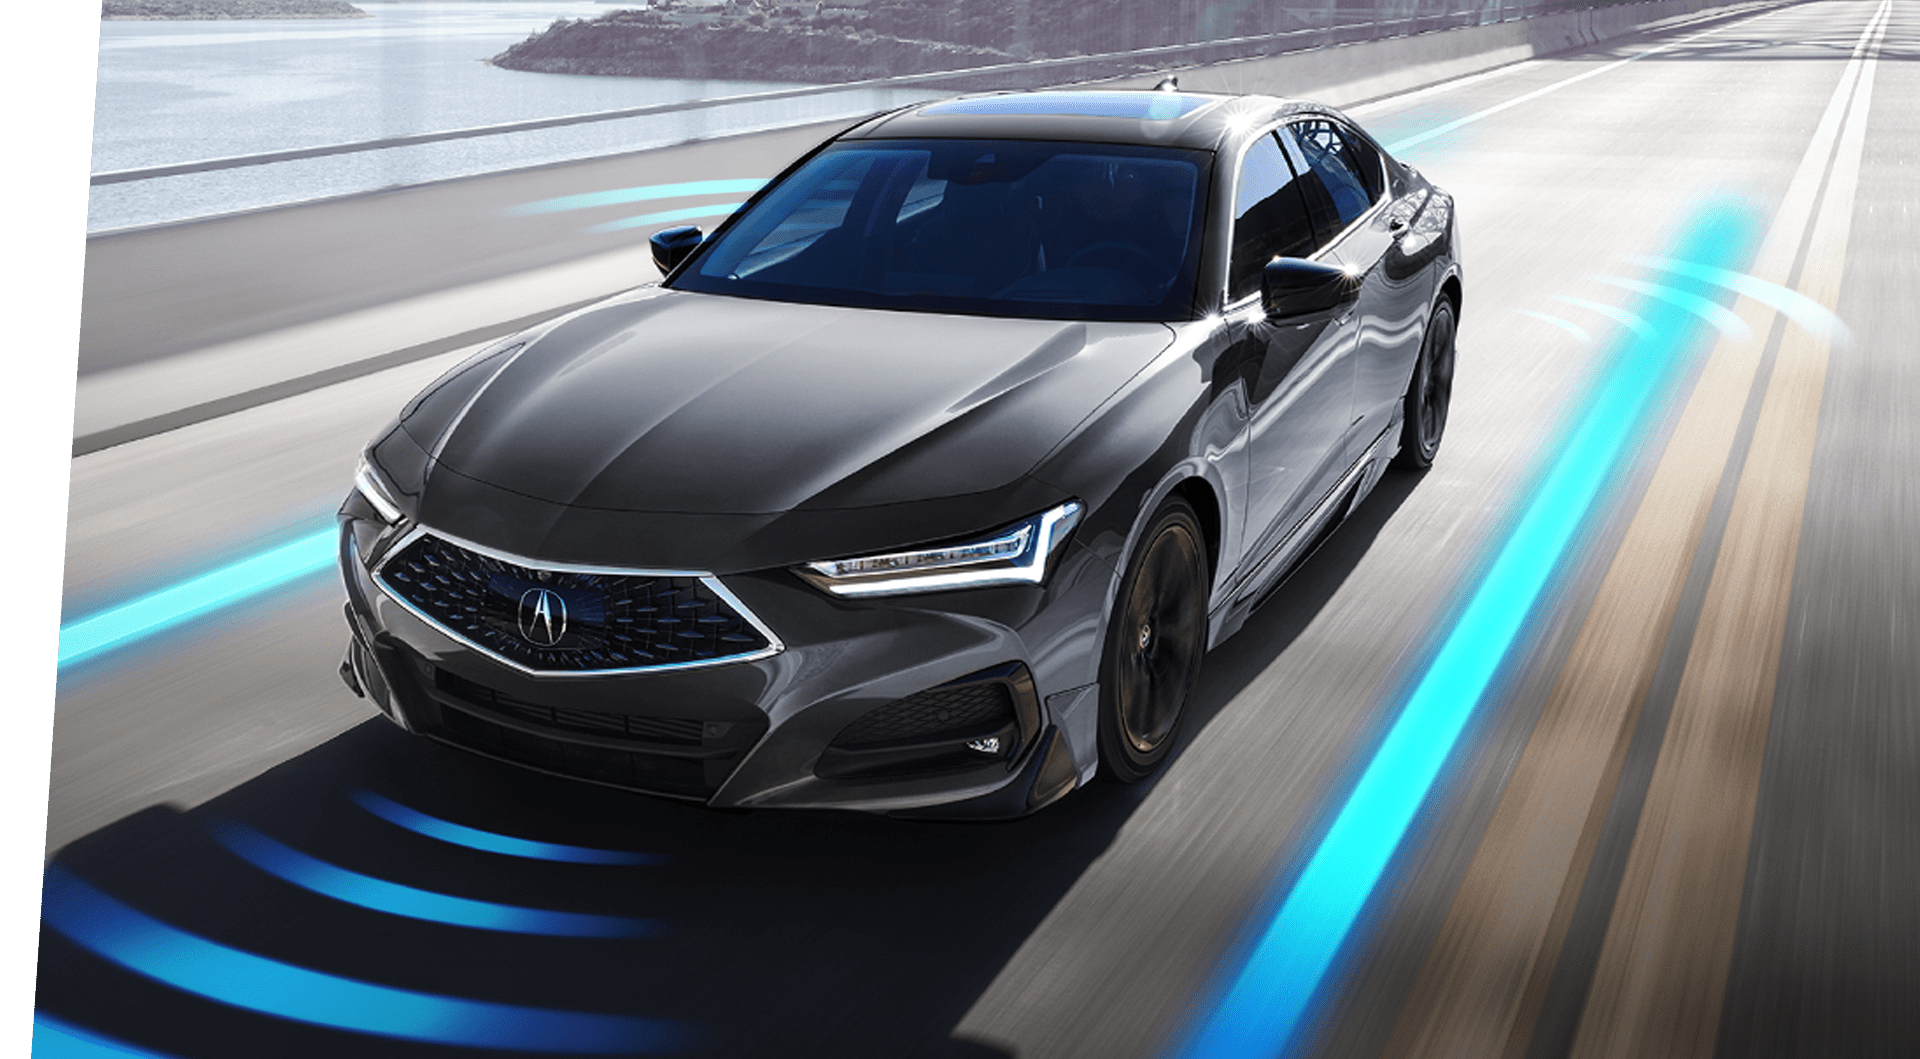 TLX 2022